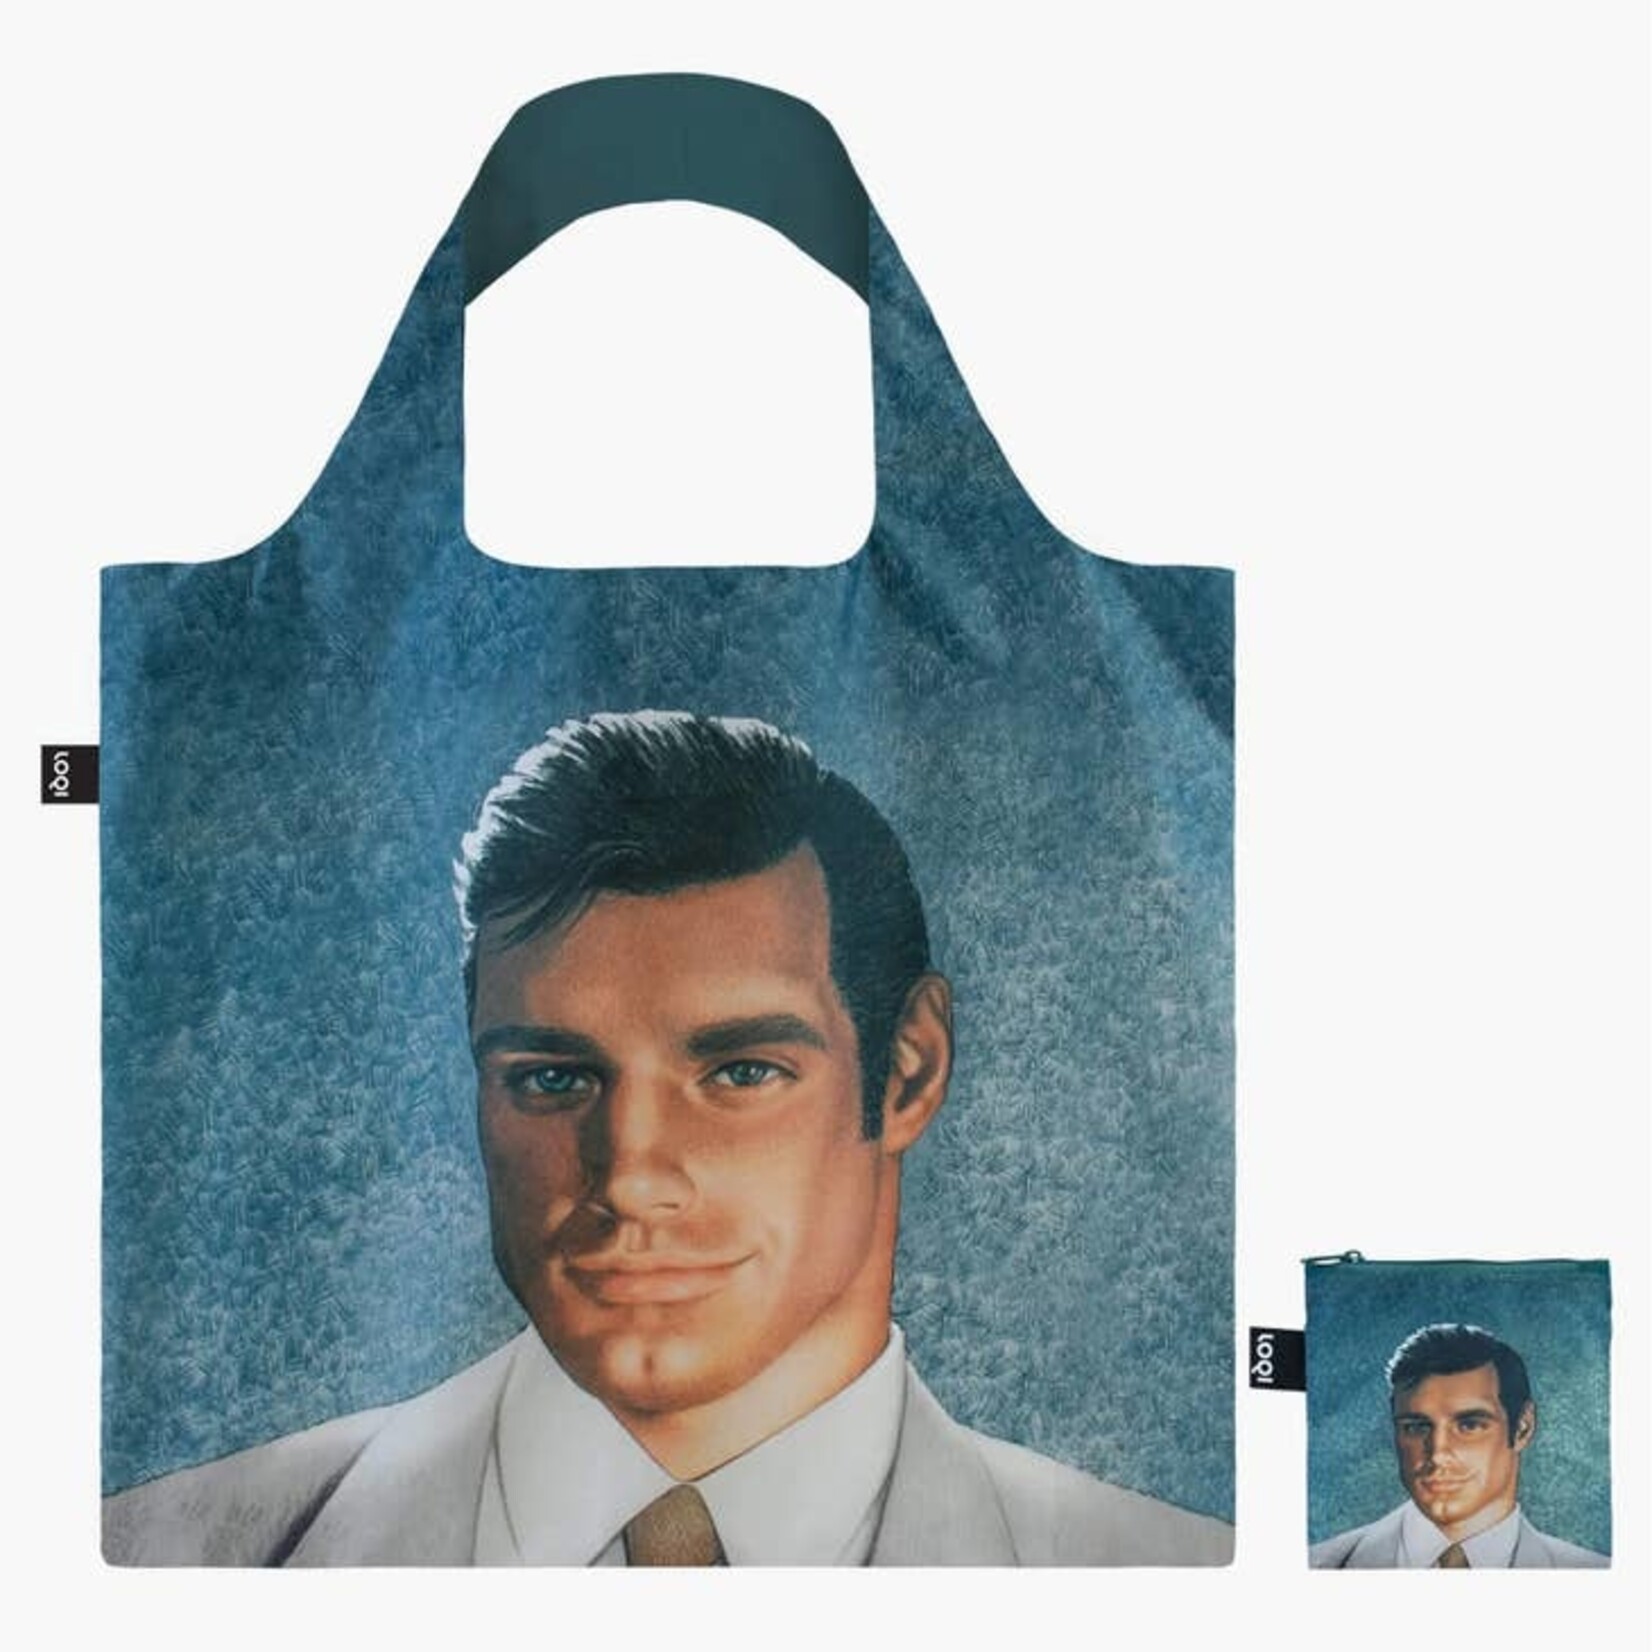 Tom of Finland Tom of Finland "Day/Night" Recycled Tote Bag